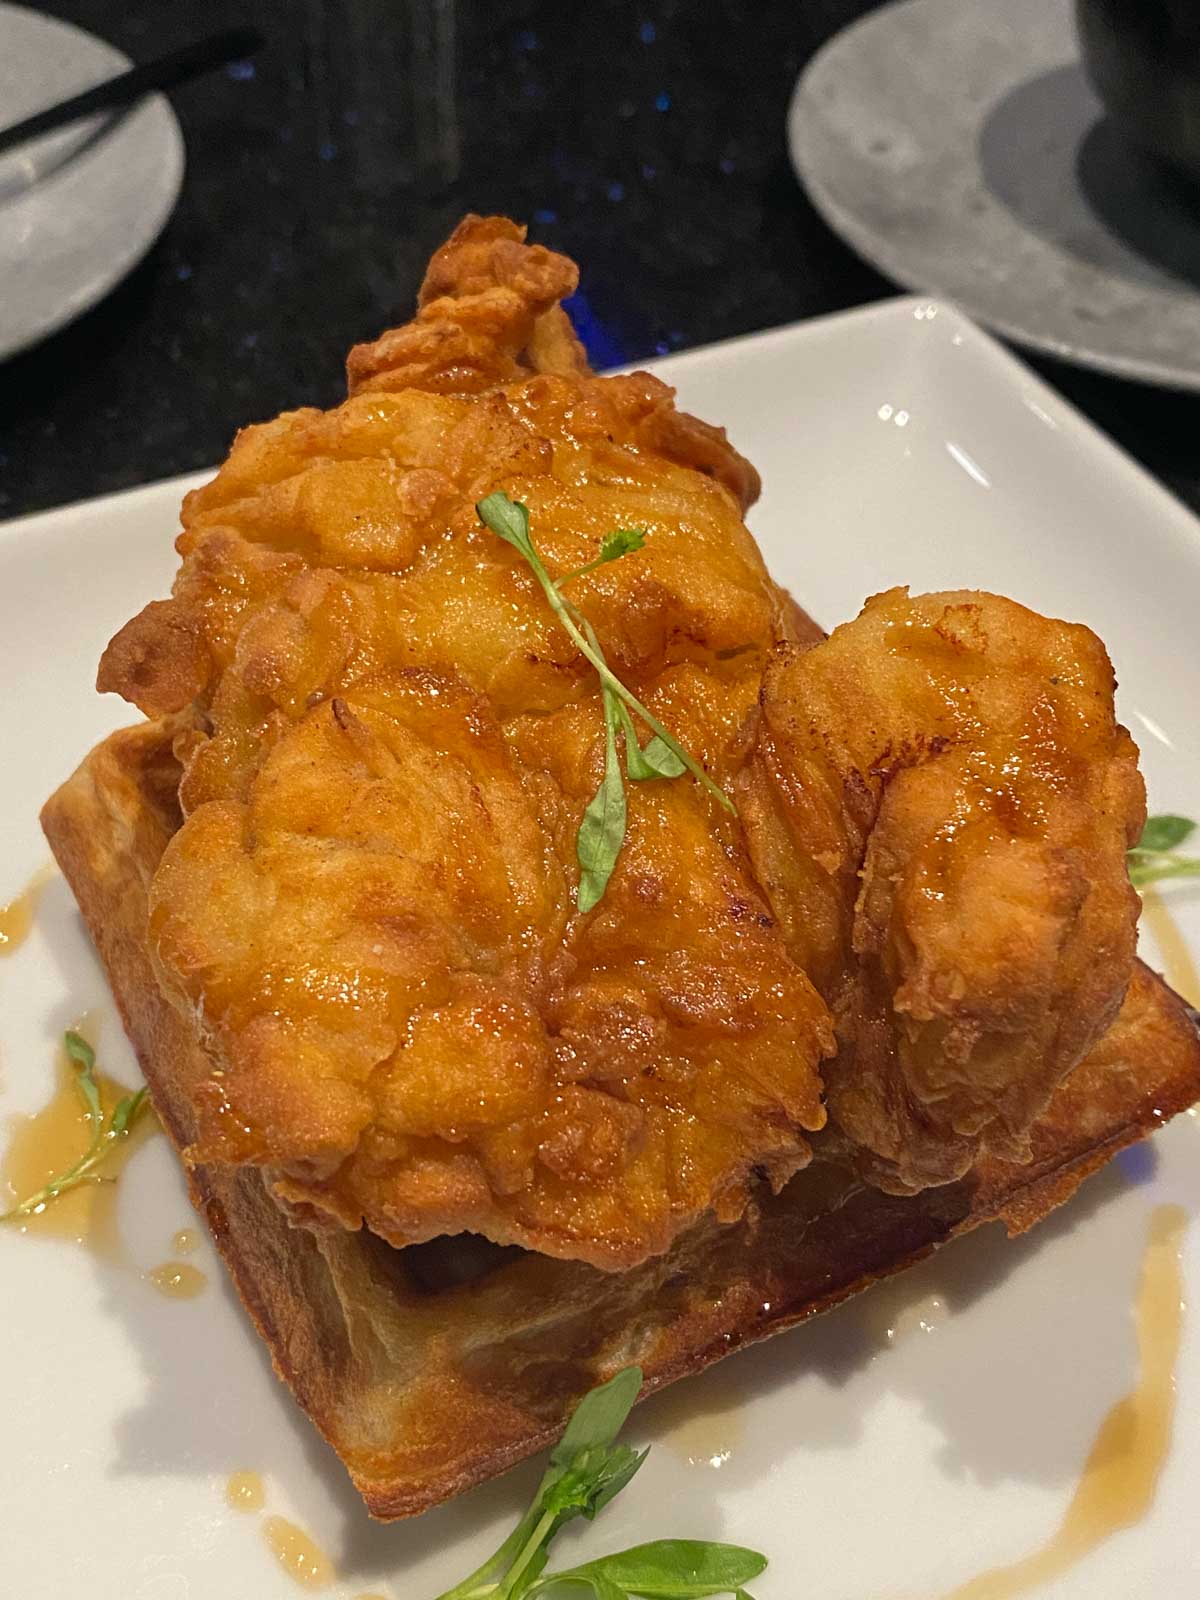 Chicken on waffle at Space 220 restaurant